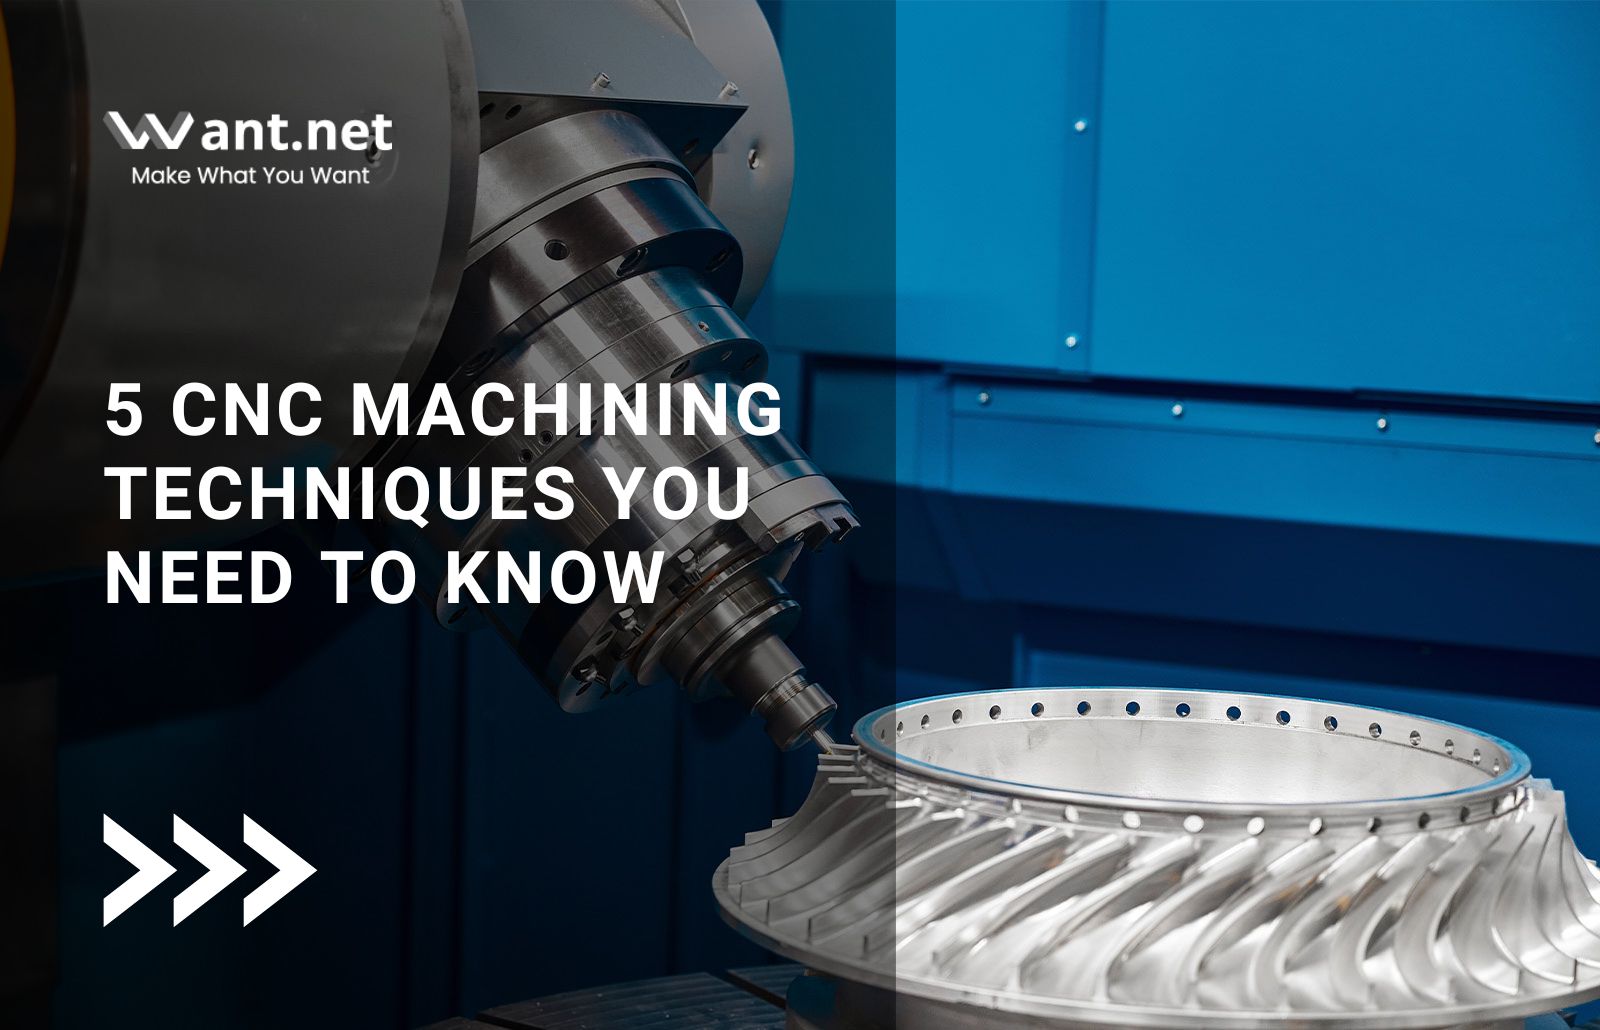 5 CNC Machining Techniques You Need to Know